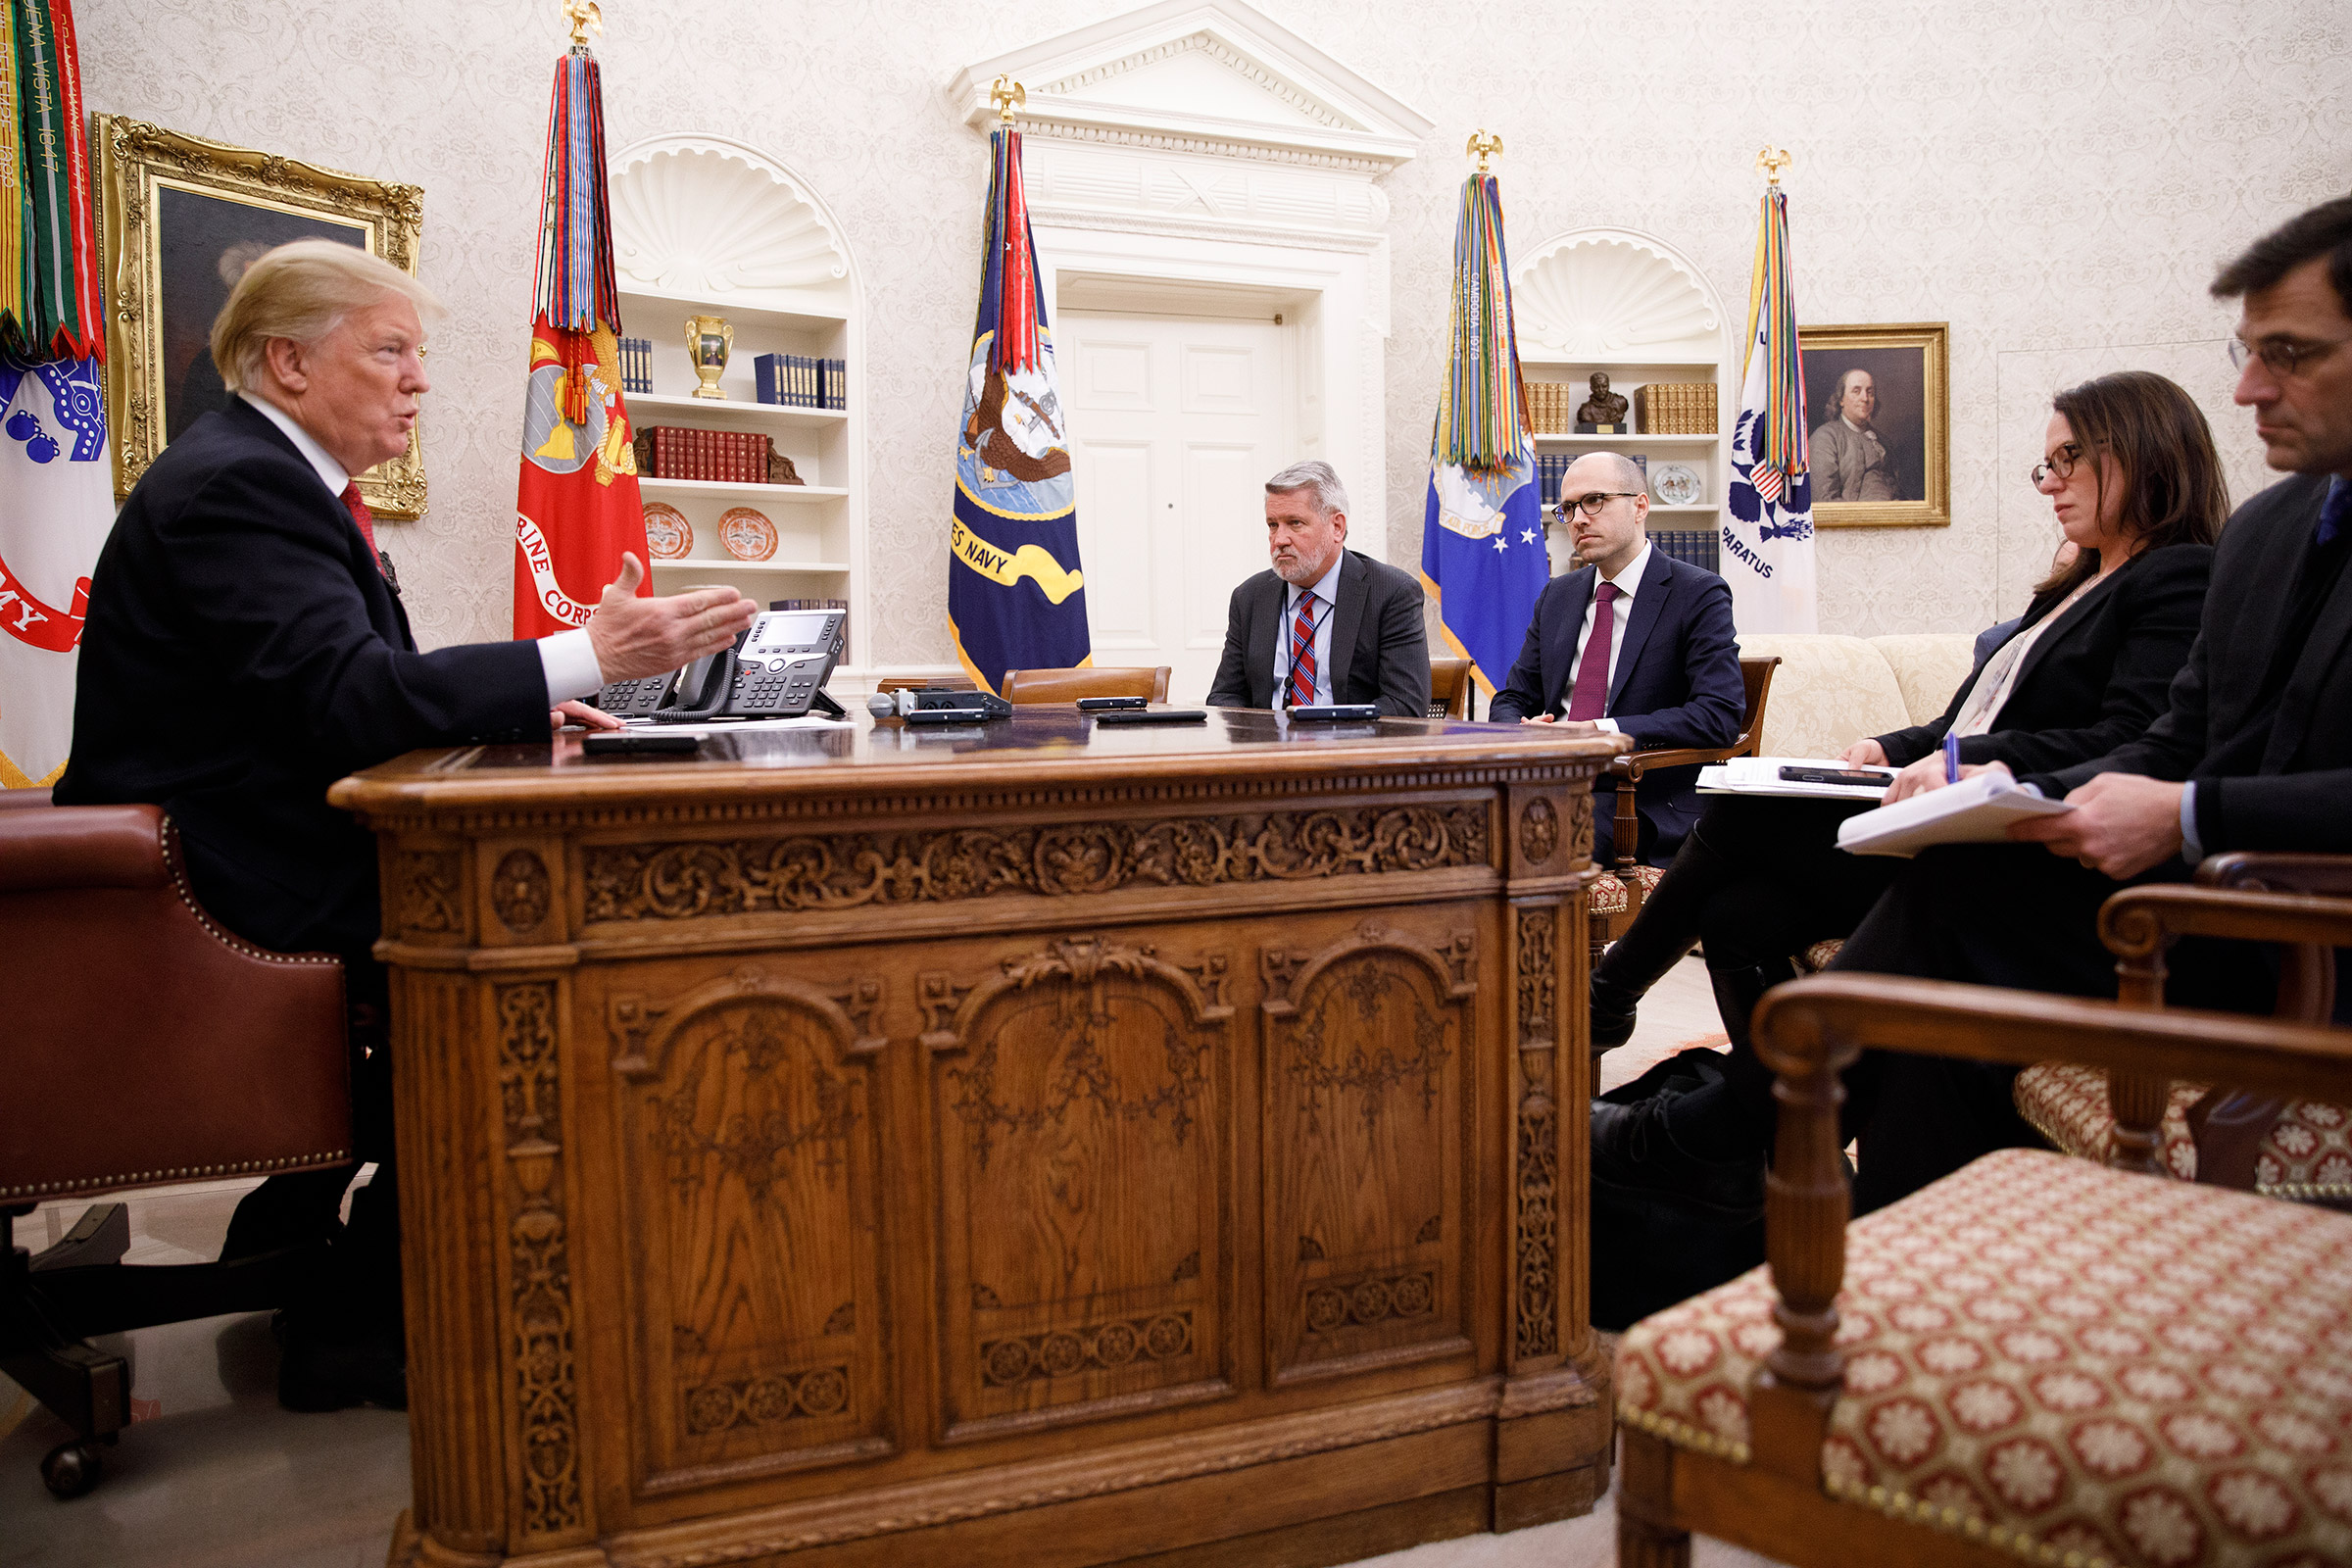 Sulzberger, right, in the second White House meeting, on Jan. 31 (Tom Brenner—The New York Times/Redux)